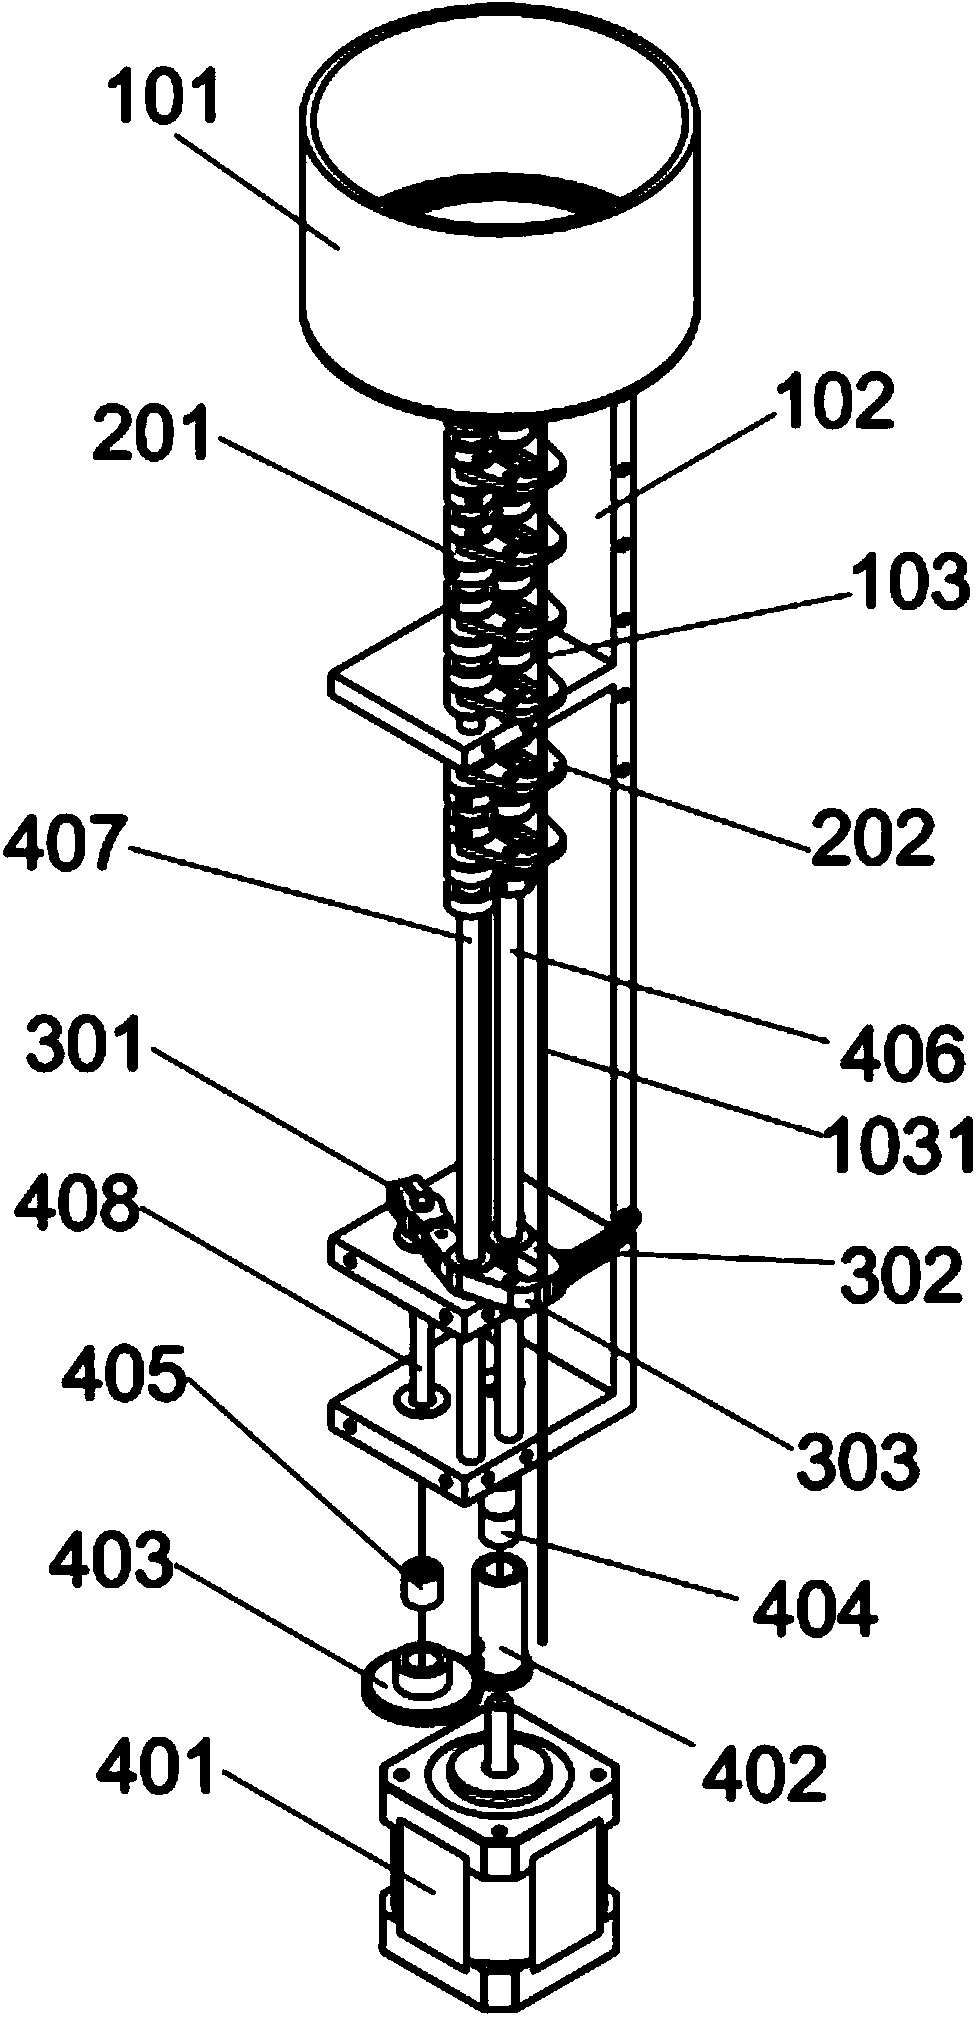 Bead arranging and feeding device of bead embroidery device